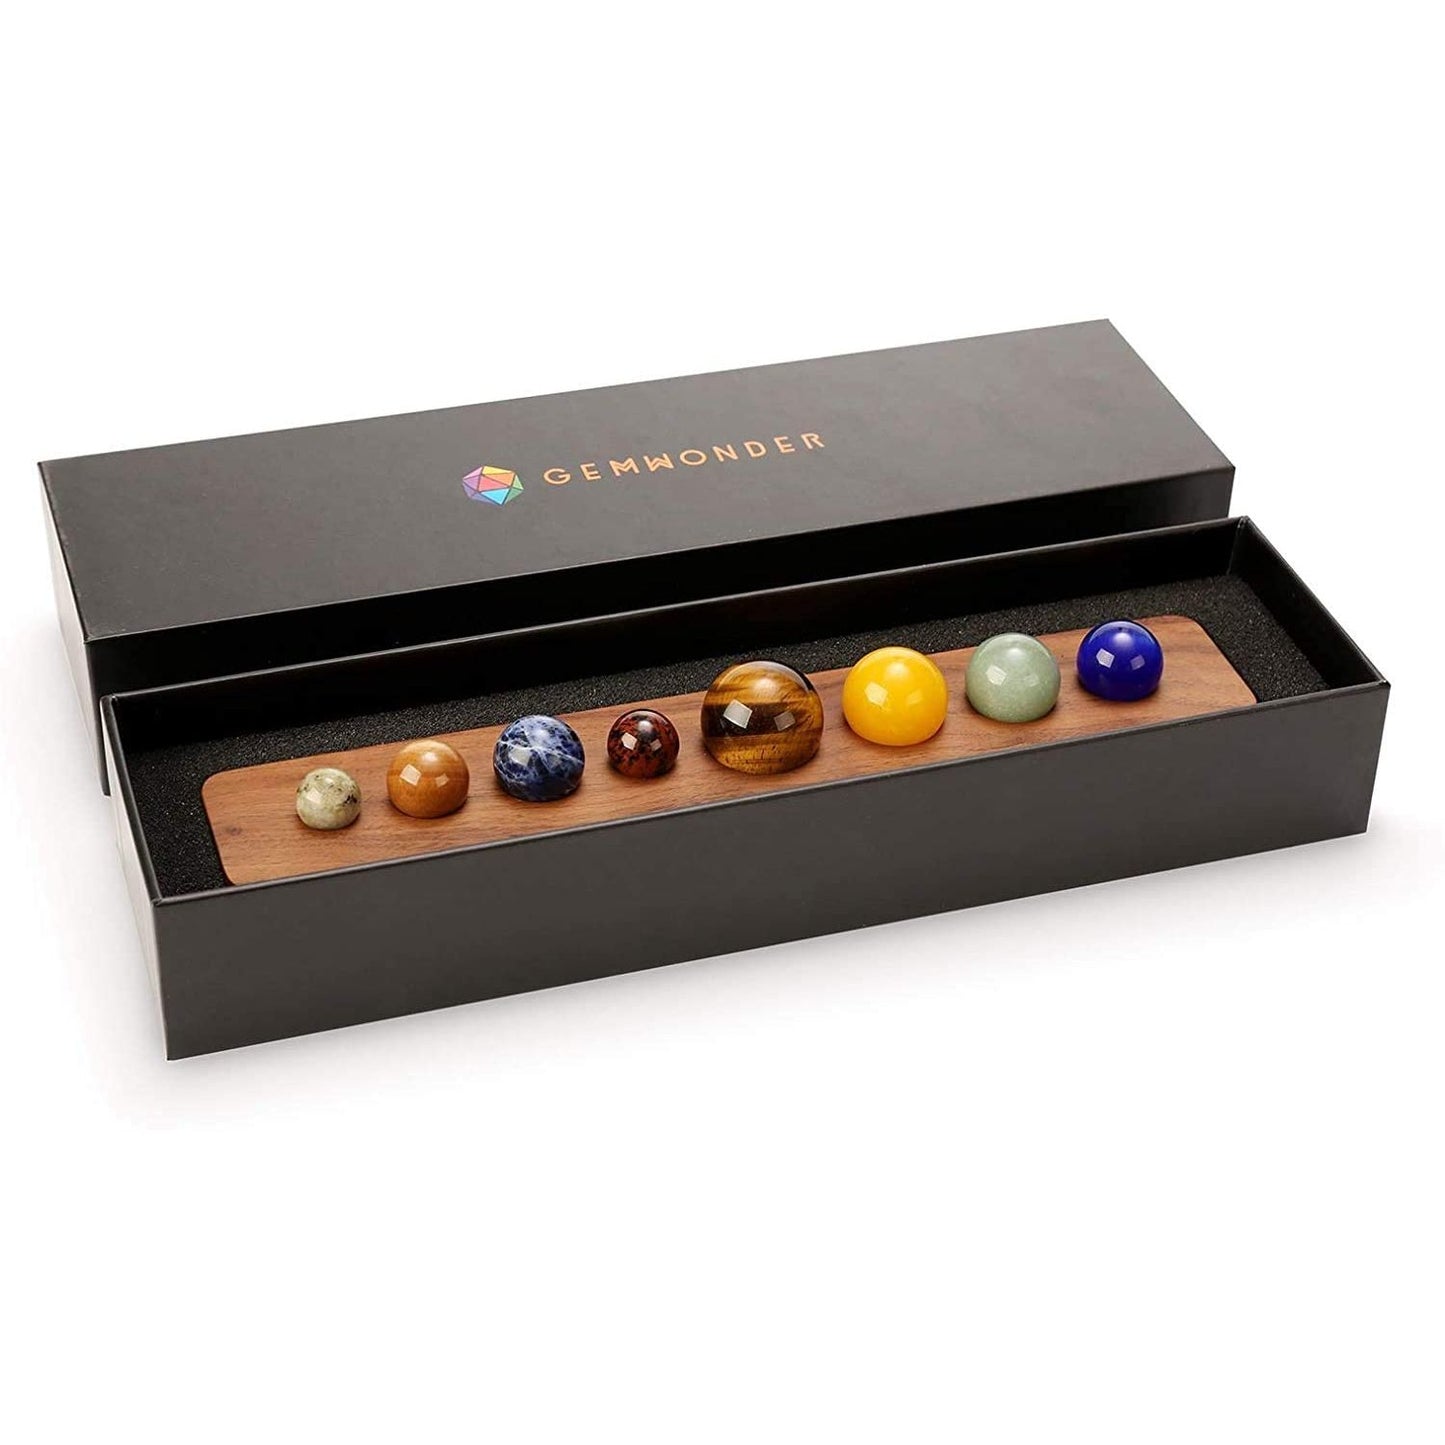 8 round gemstones each one representing the 8 planets in the universe displayed in a walnut case and a black gift box